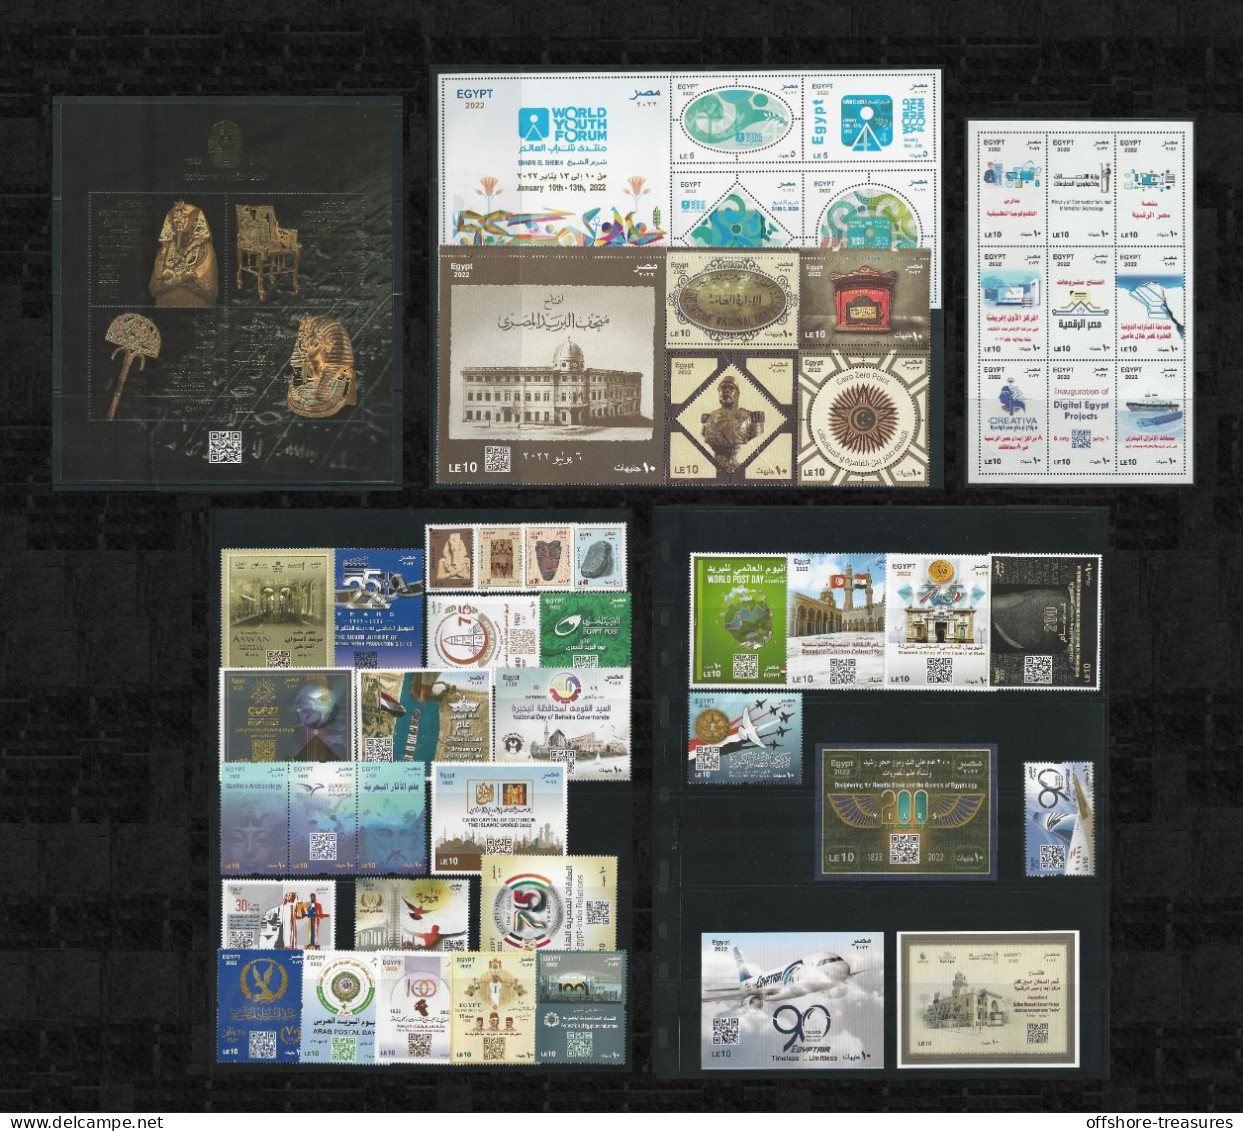 Egypt EGYPTE 2022 ONE YEAR Full Set Stamps 51 Pieces, ALL Commemorative Stamp & Definitive & Souvenir Sheet Issued - Unused Stamps